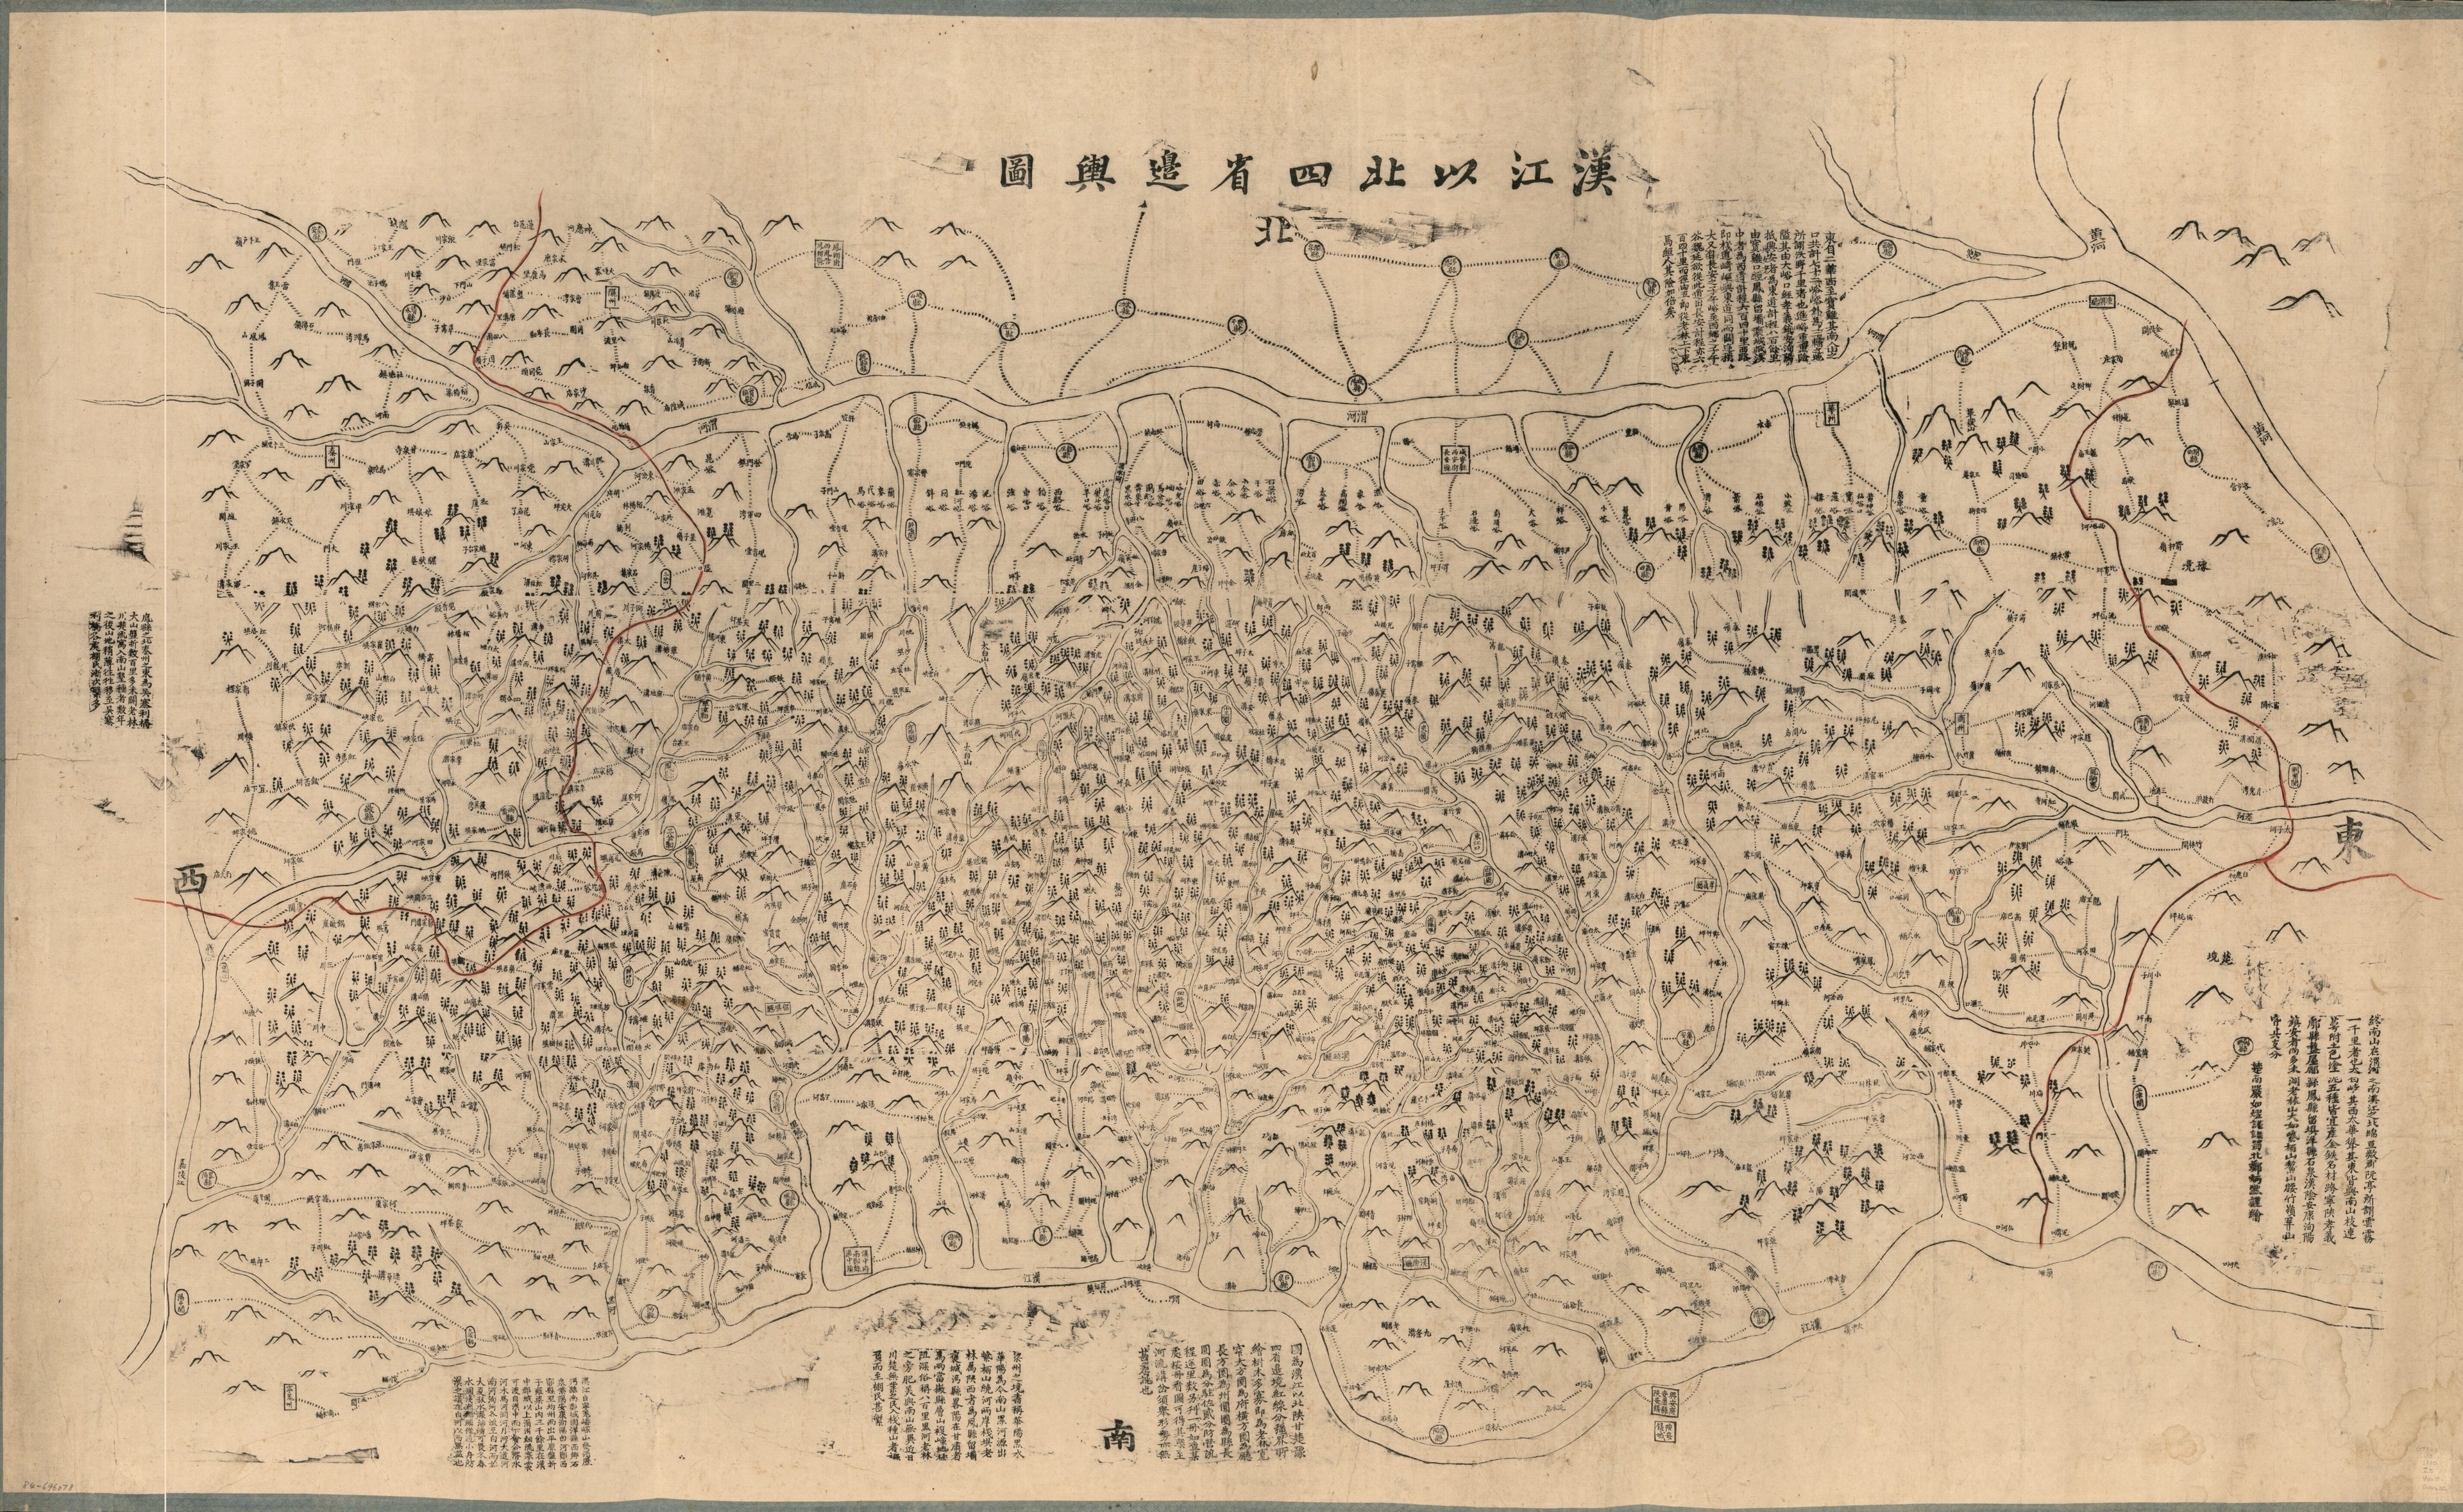 This old map of Han Jiang Yi Bei Si Sheng Bian Yu Tu (漢江以北四省邊與圖 /, Map of Four Provinces On the North Bank of the Han River) from 1821 was created by Bingran Zheng in 1821